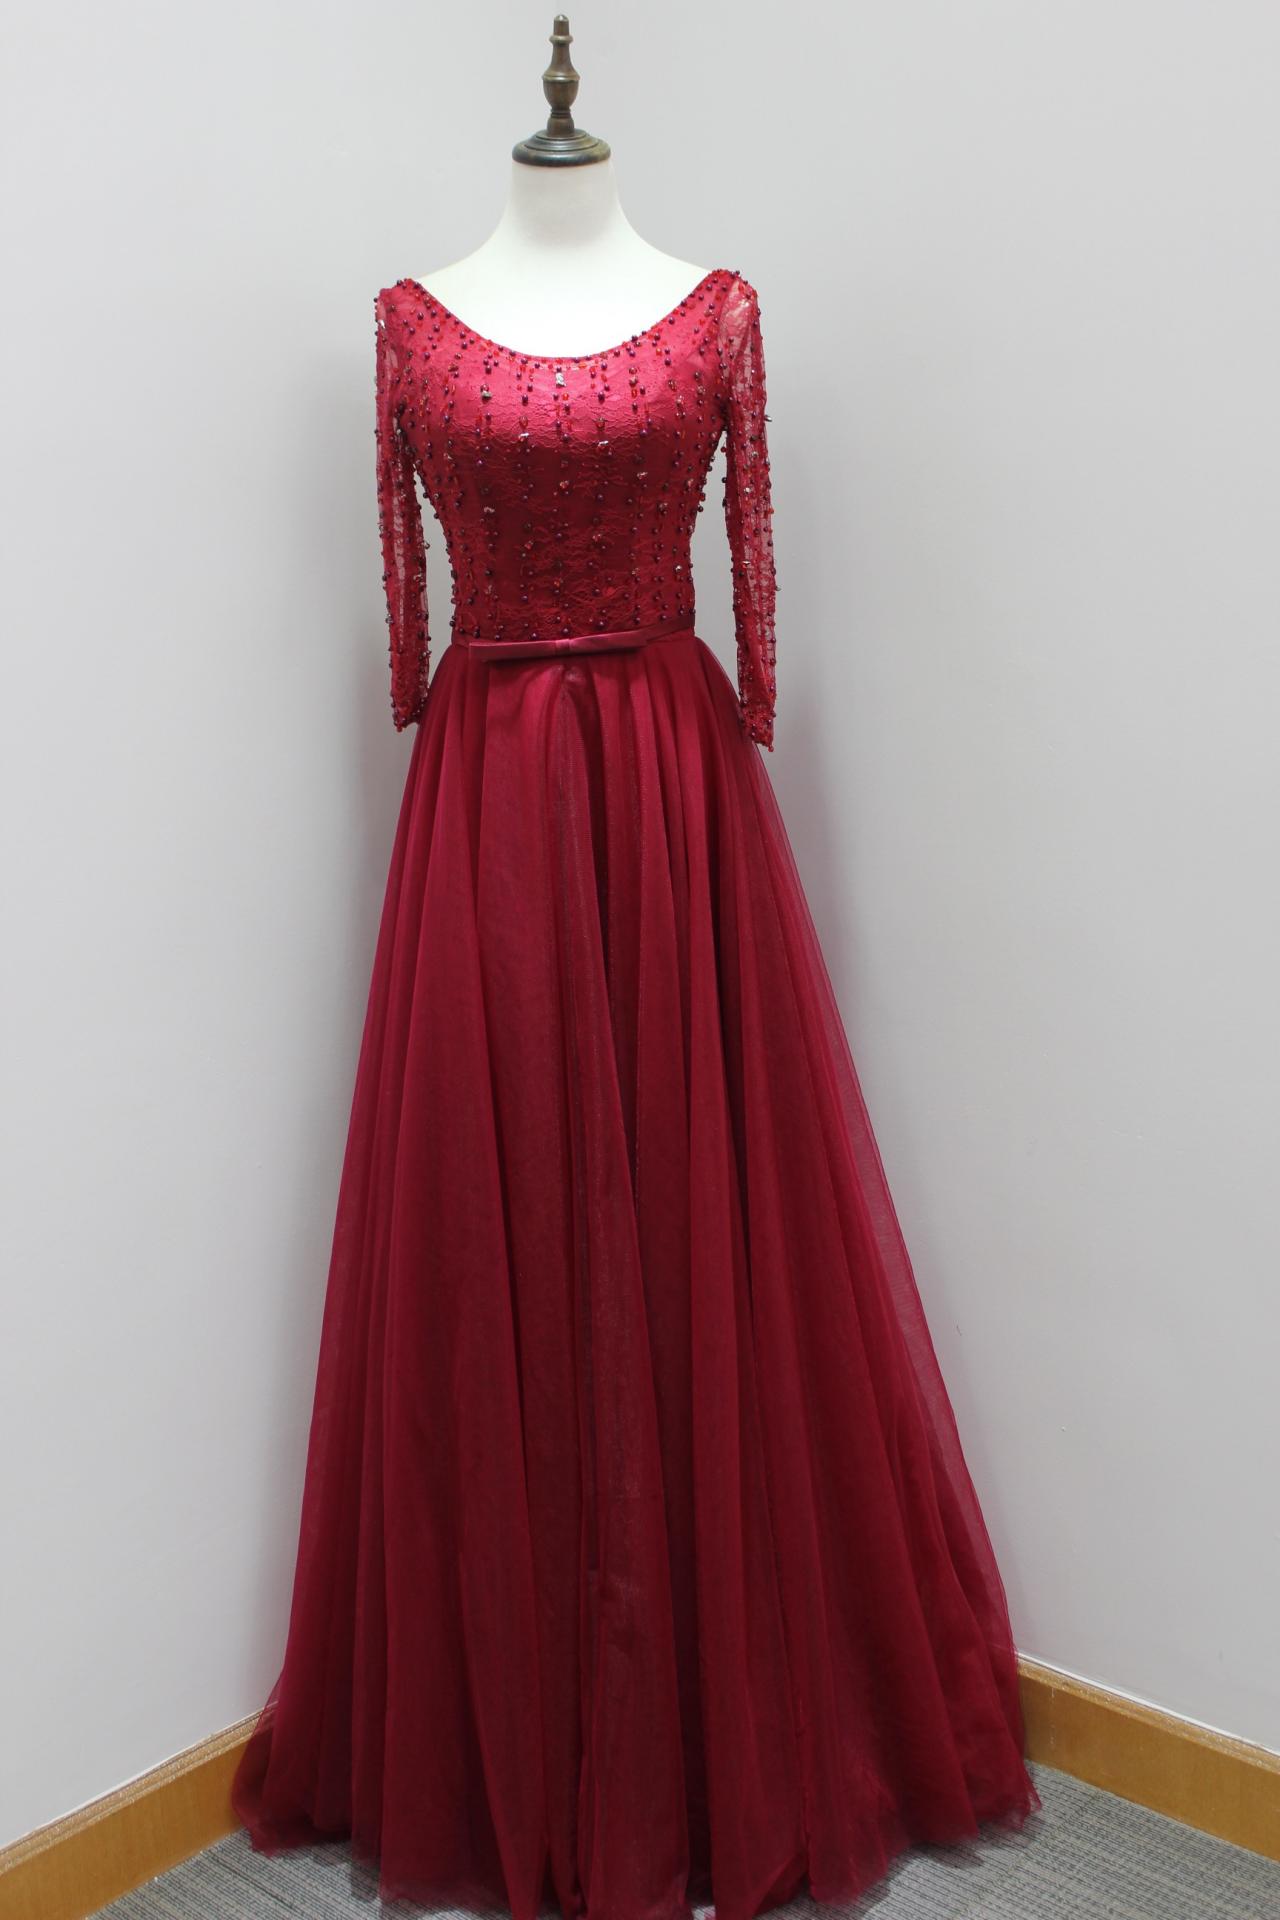 Elegant Burgundy Long Sleeve Evening Dresses With Illusion Neckline Beaded Prom Dress Long Tulle Formal Gowns